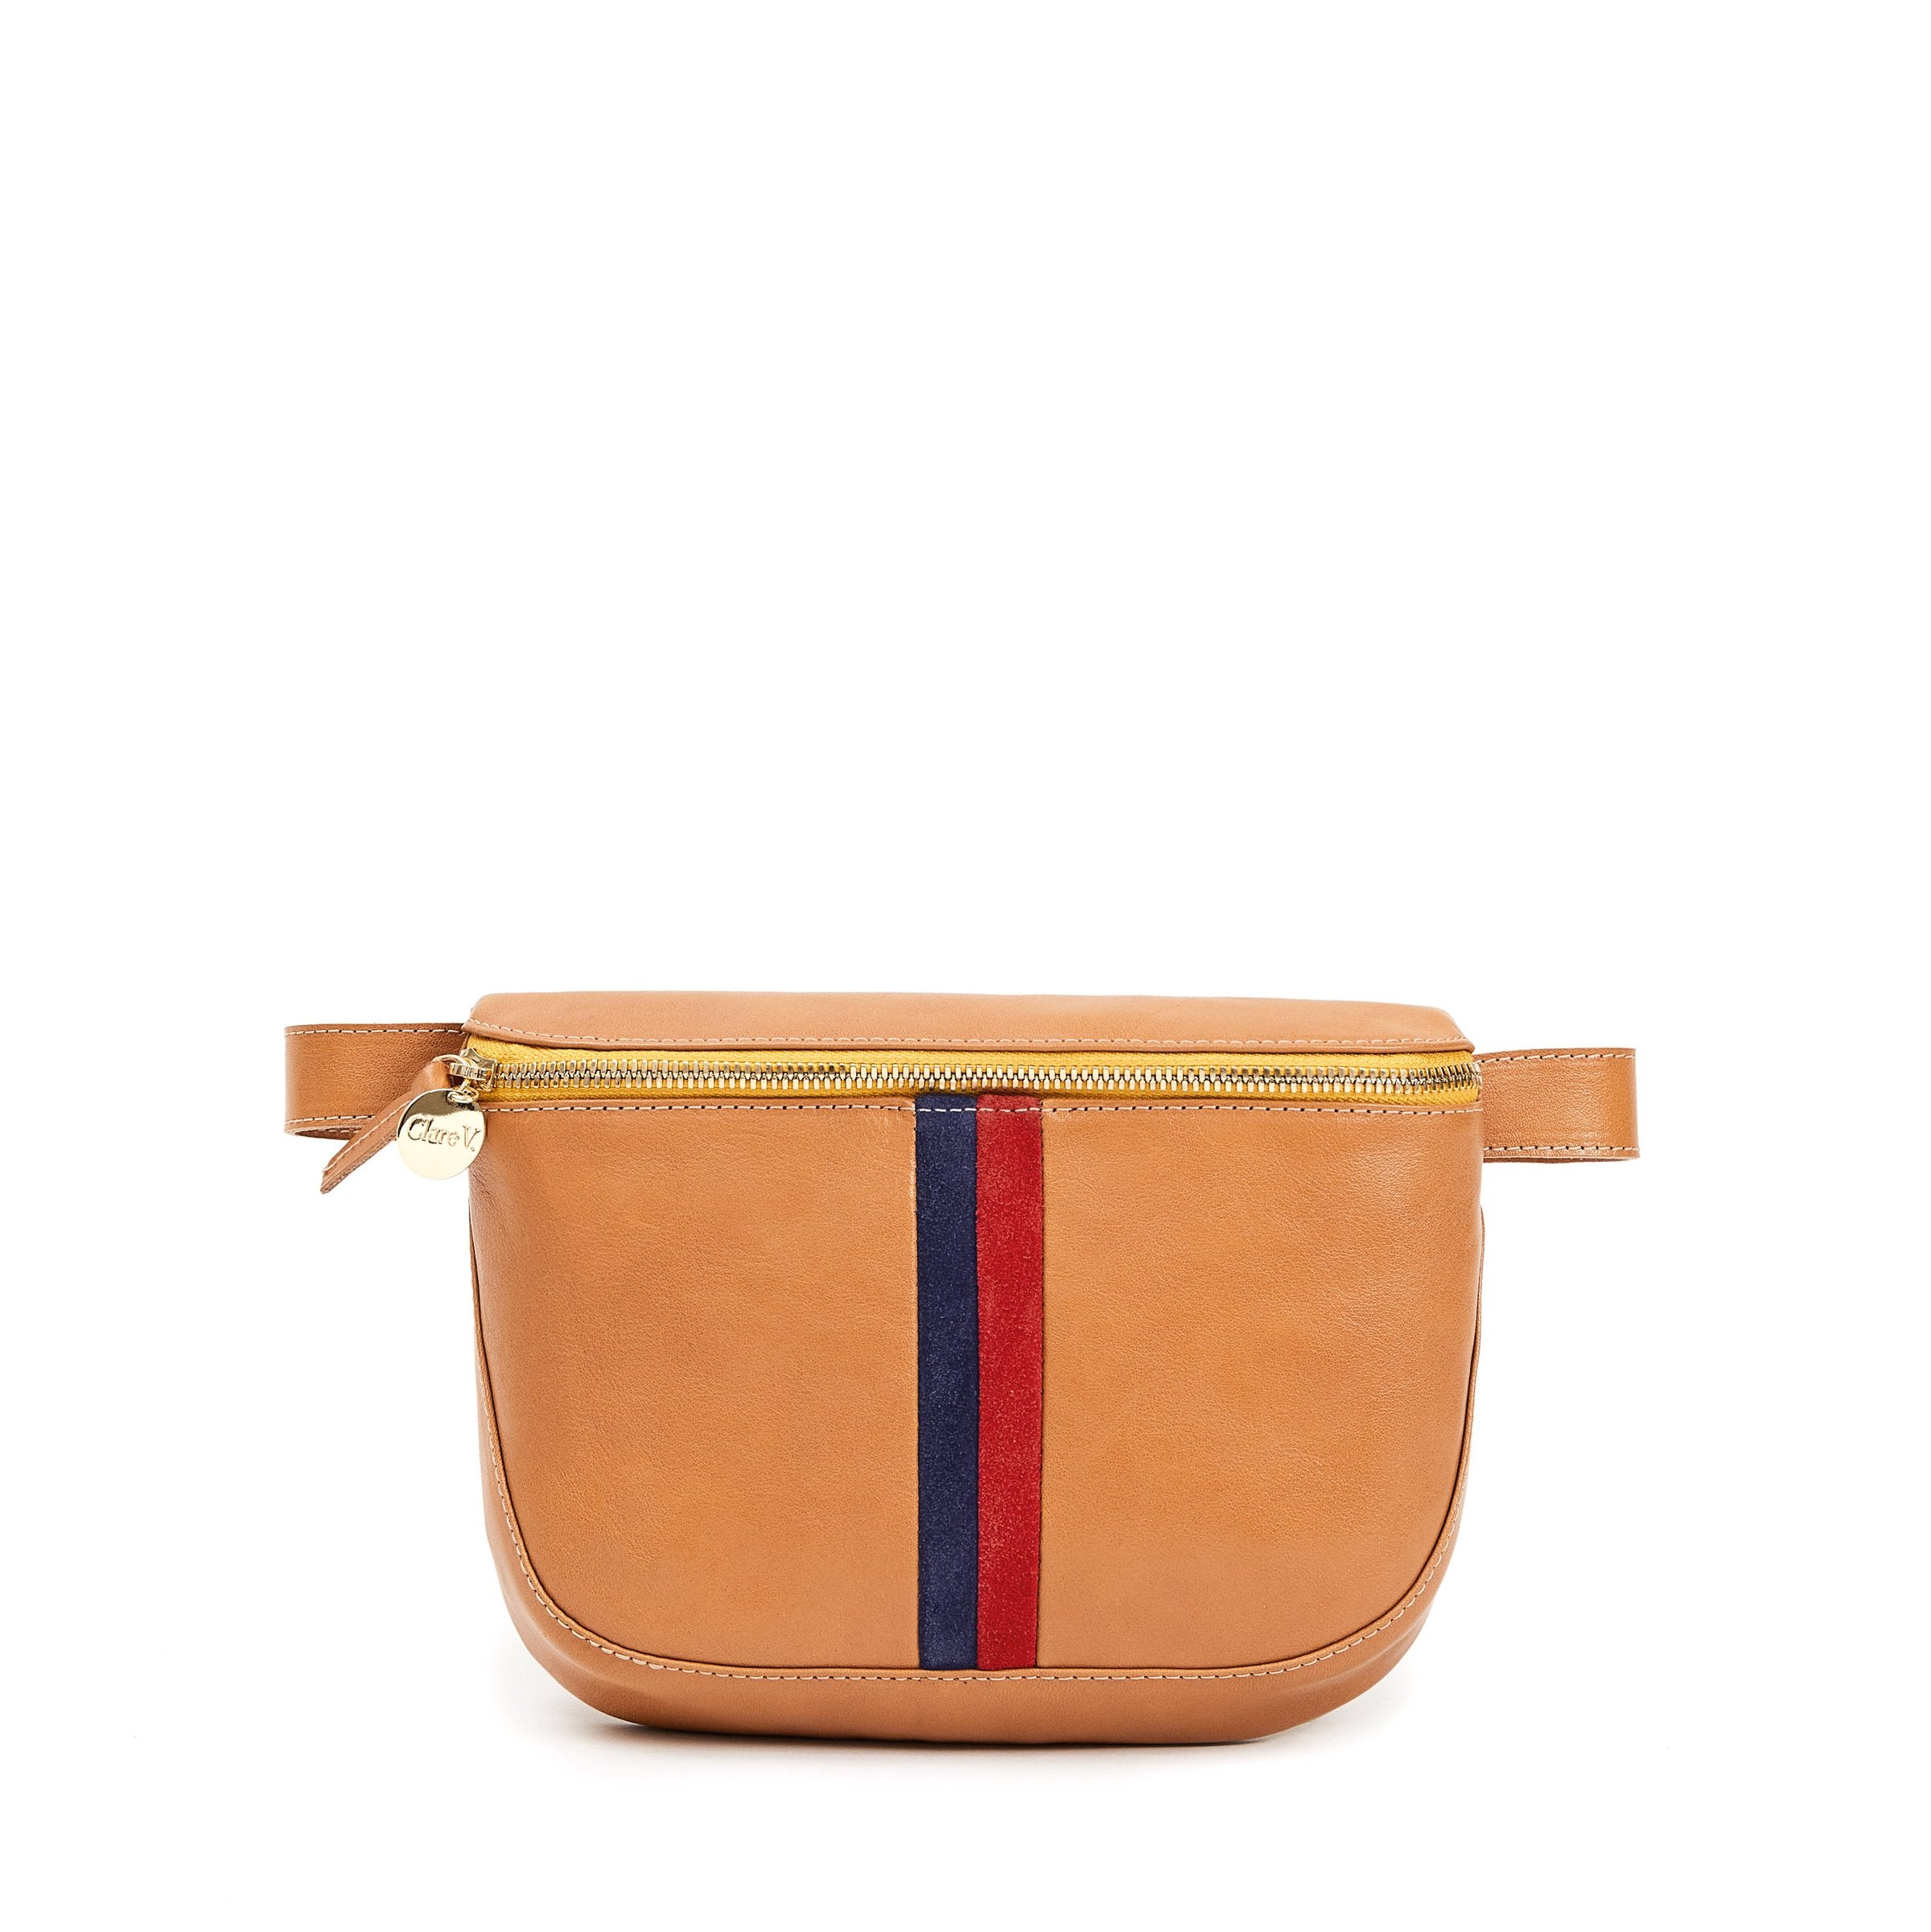 Clare V.  Fanny Pack, Rustic Suede Desert Inlay, Natural – LAPIS